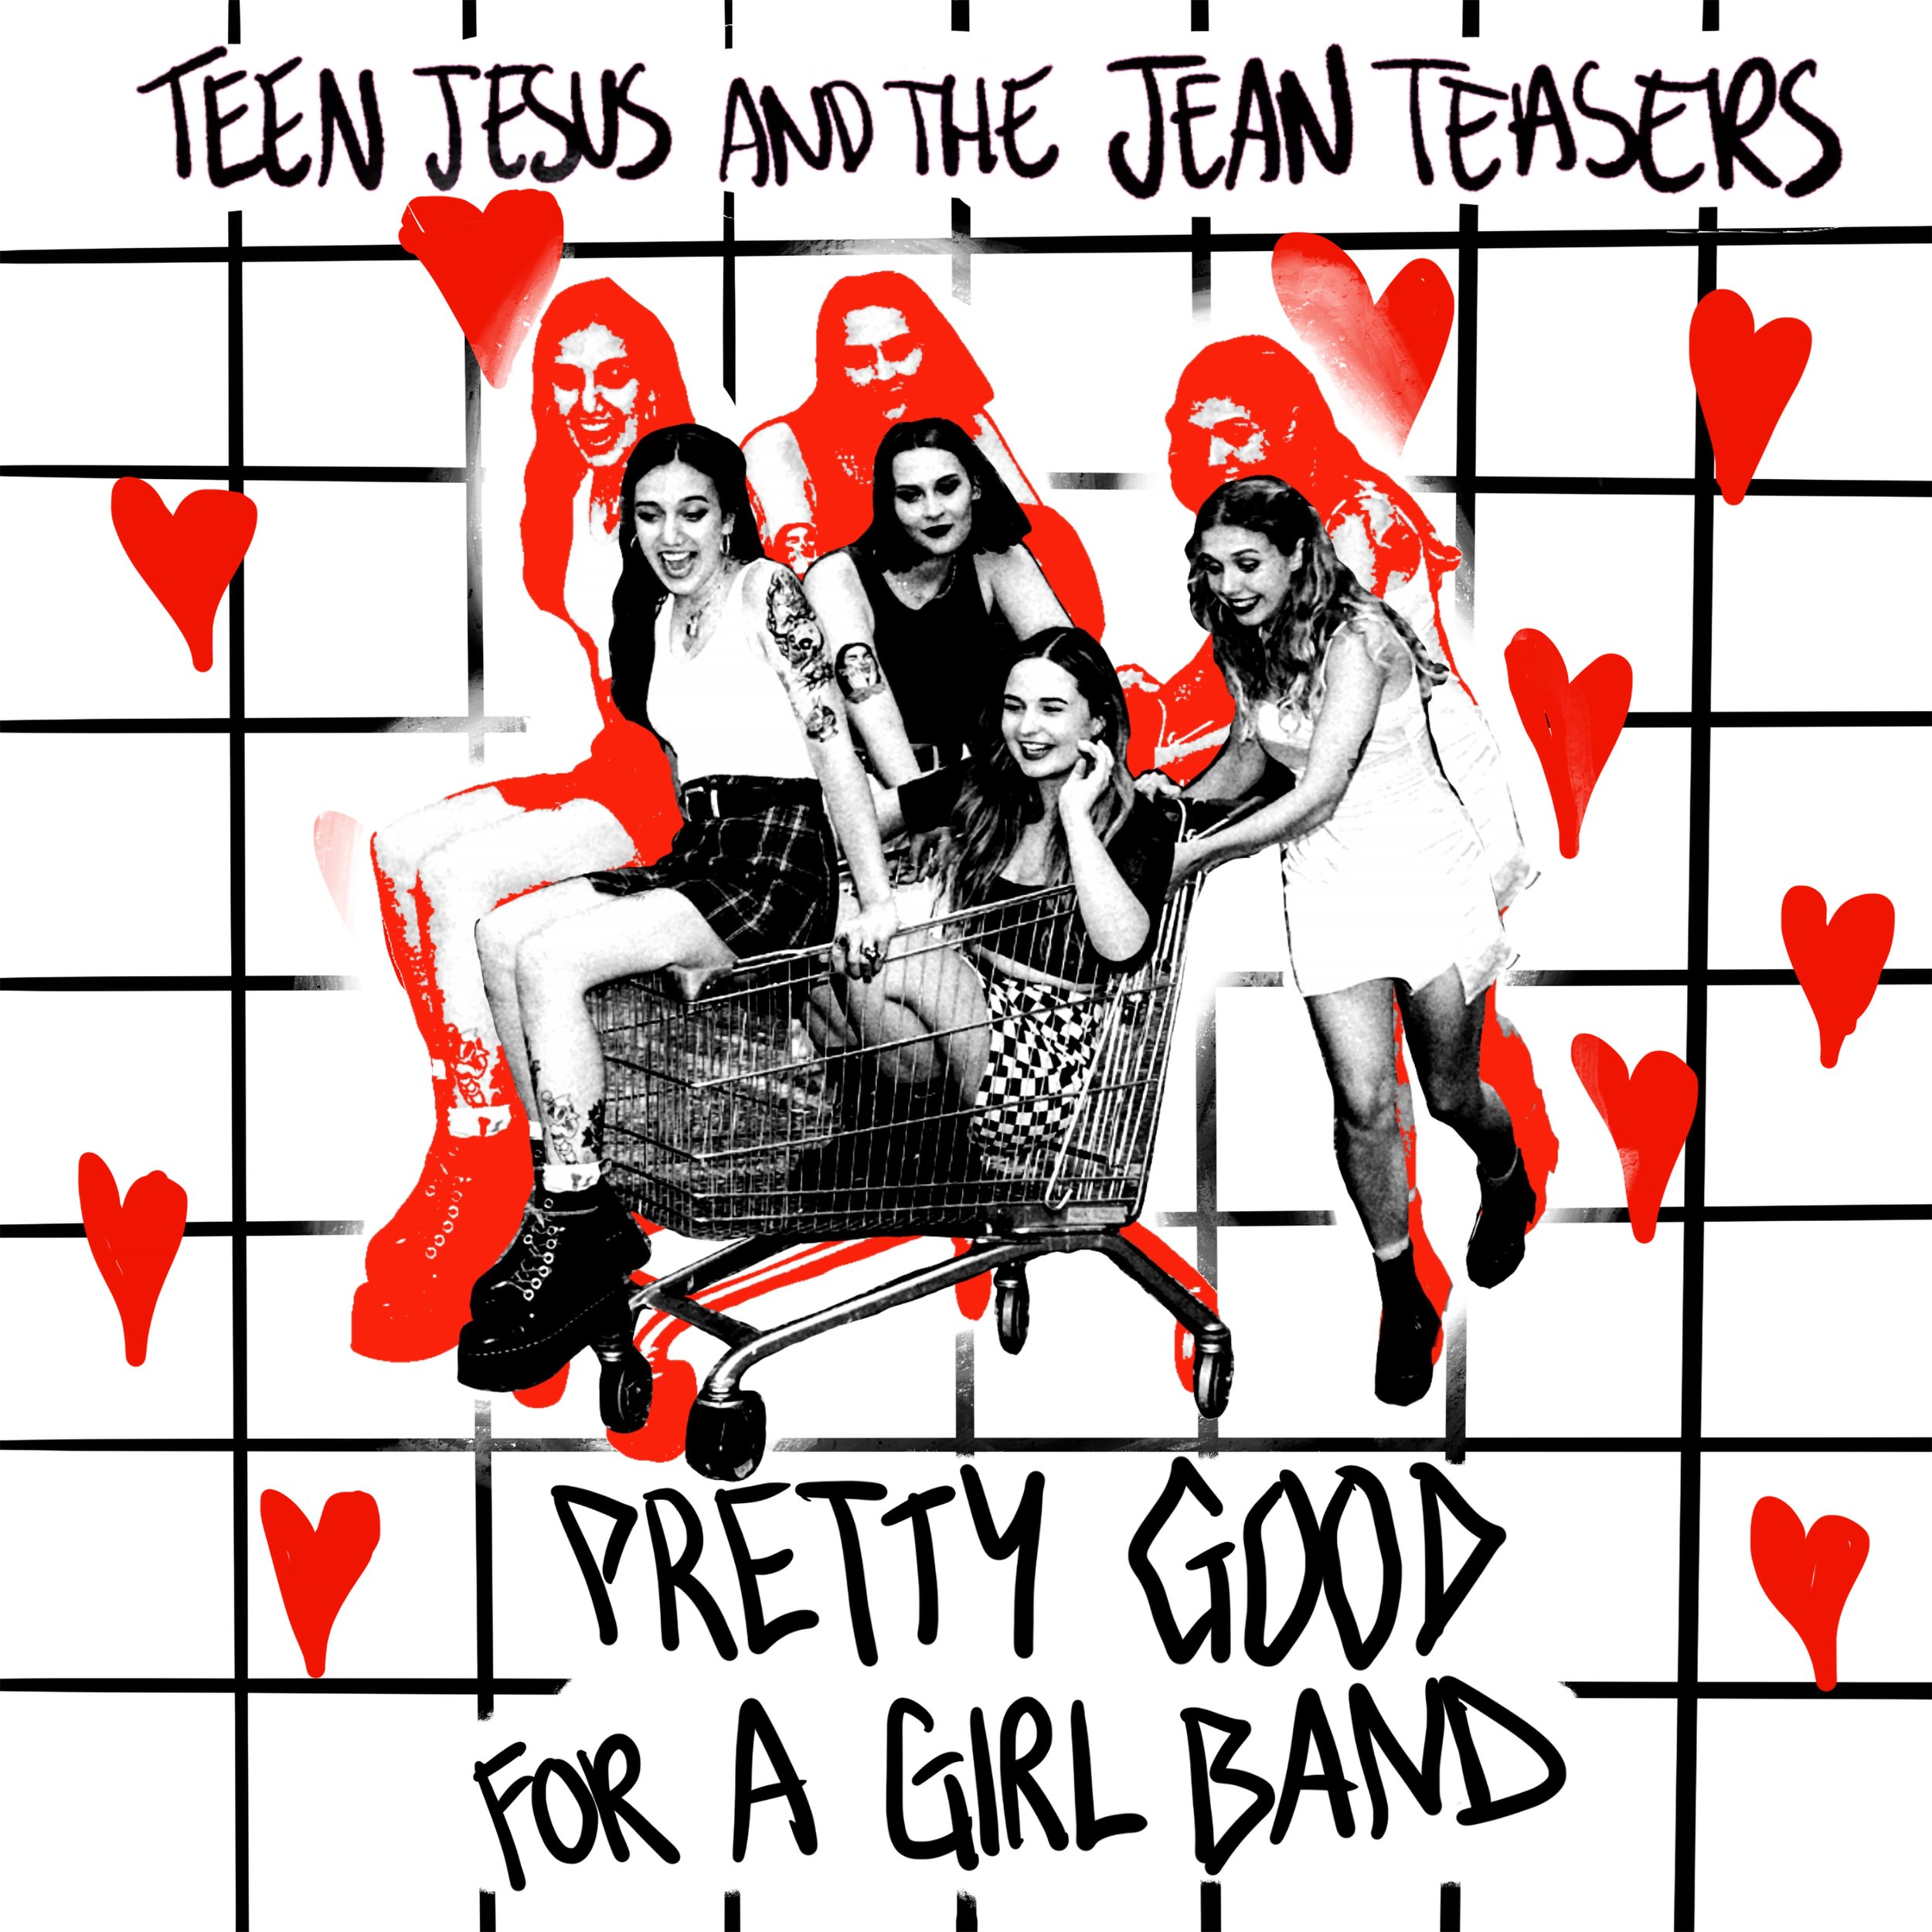 Teen Jesus and the Jean Teasers - Pretty Good For A Girl Band - EP